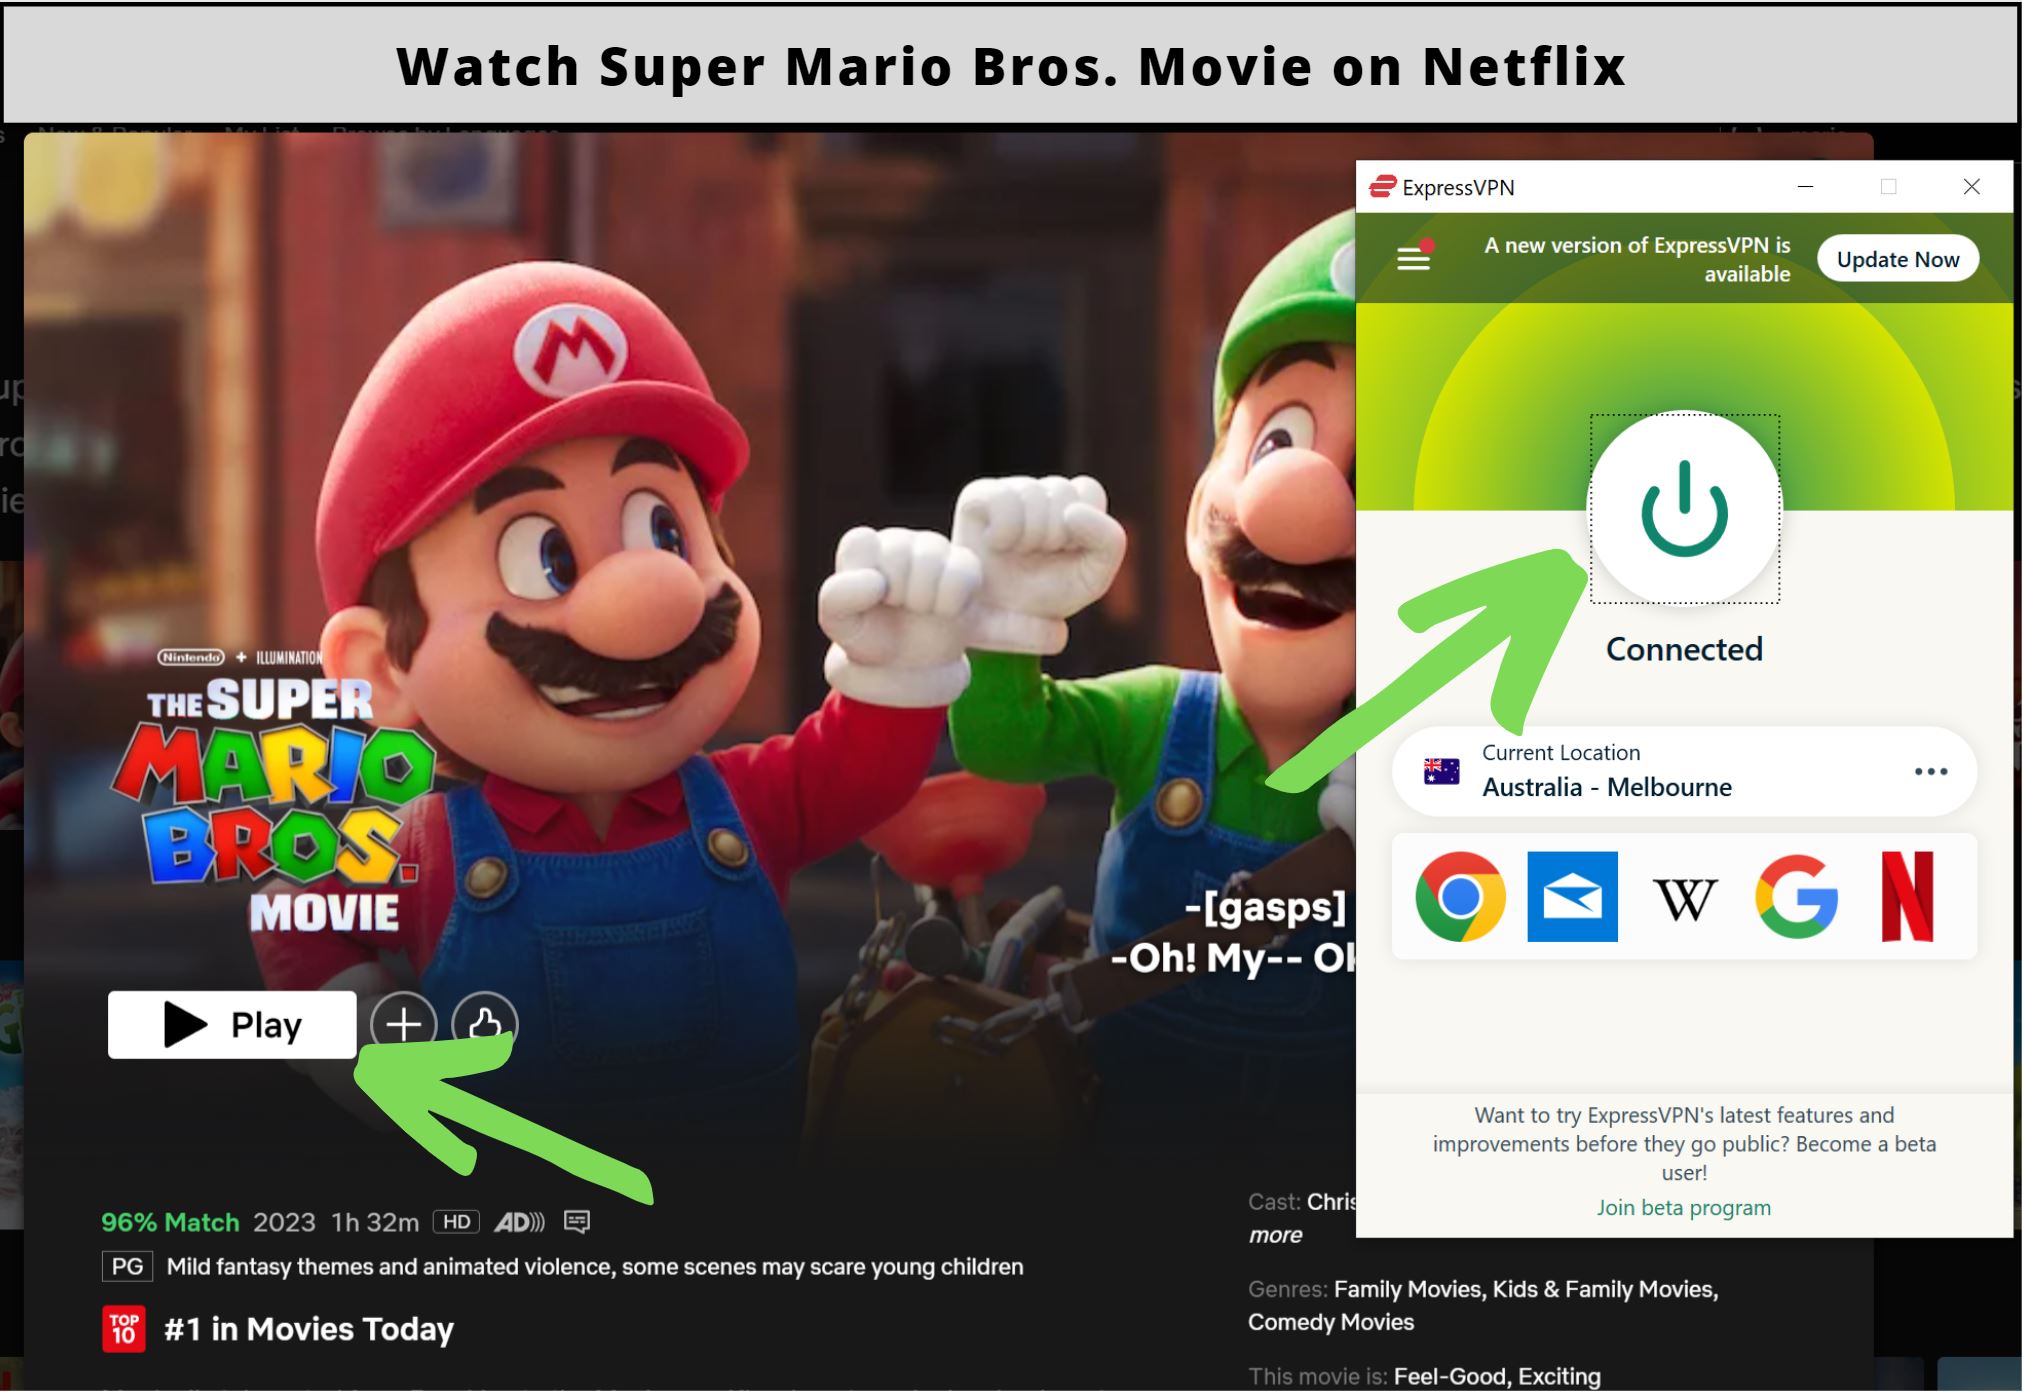 How to watch The Super Mario Bros. Movie on Netflix?